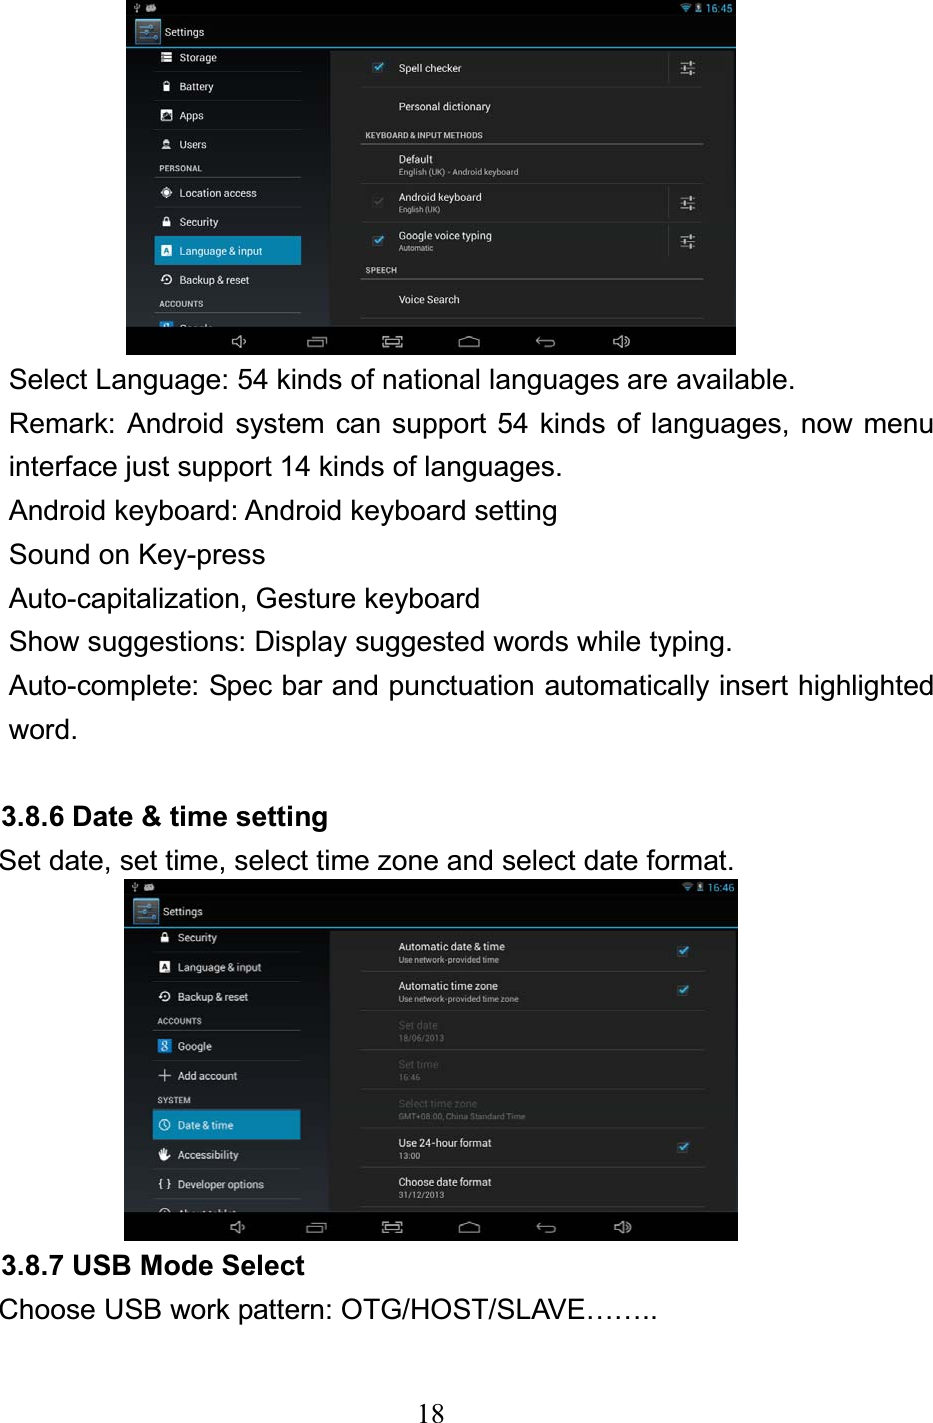 18Select Language: 54 kinds of national languages are available. Remark: Android system can support 54 kinds of languages, now menu interface just support 14 kinds of languages. Android keyboard: Android keyboard setting Sound on Key-press Auto-capitalization, Gesture keyboard Show suggestions: Display suggested words while typing. Auto-complete: Spec bar and punctuation automatically insert highlighted word. 3.8.6 Date &amp; time setting Set date, set time, select time zone and select date format. 3.8.7 USB Mode Select Choose USB work pattern: OTG/HOST/SLAVE…….. 